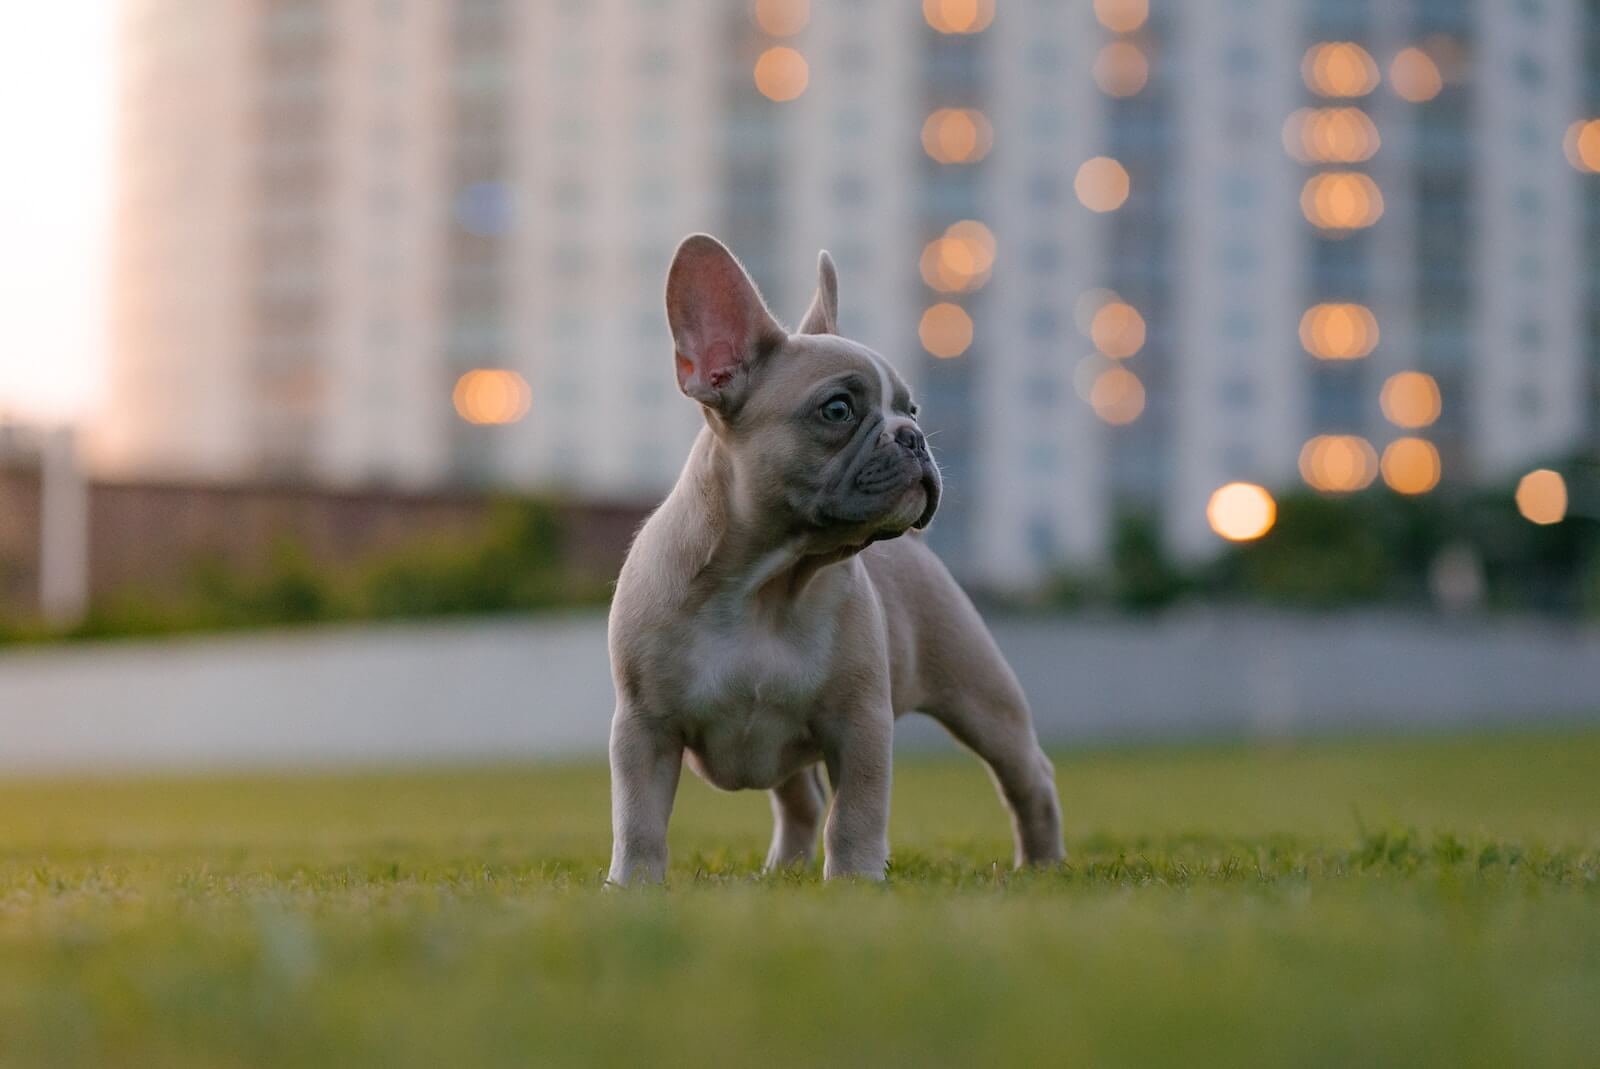 A French Bulldog in a city park